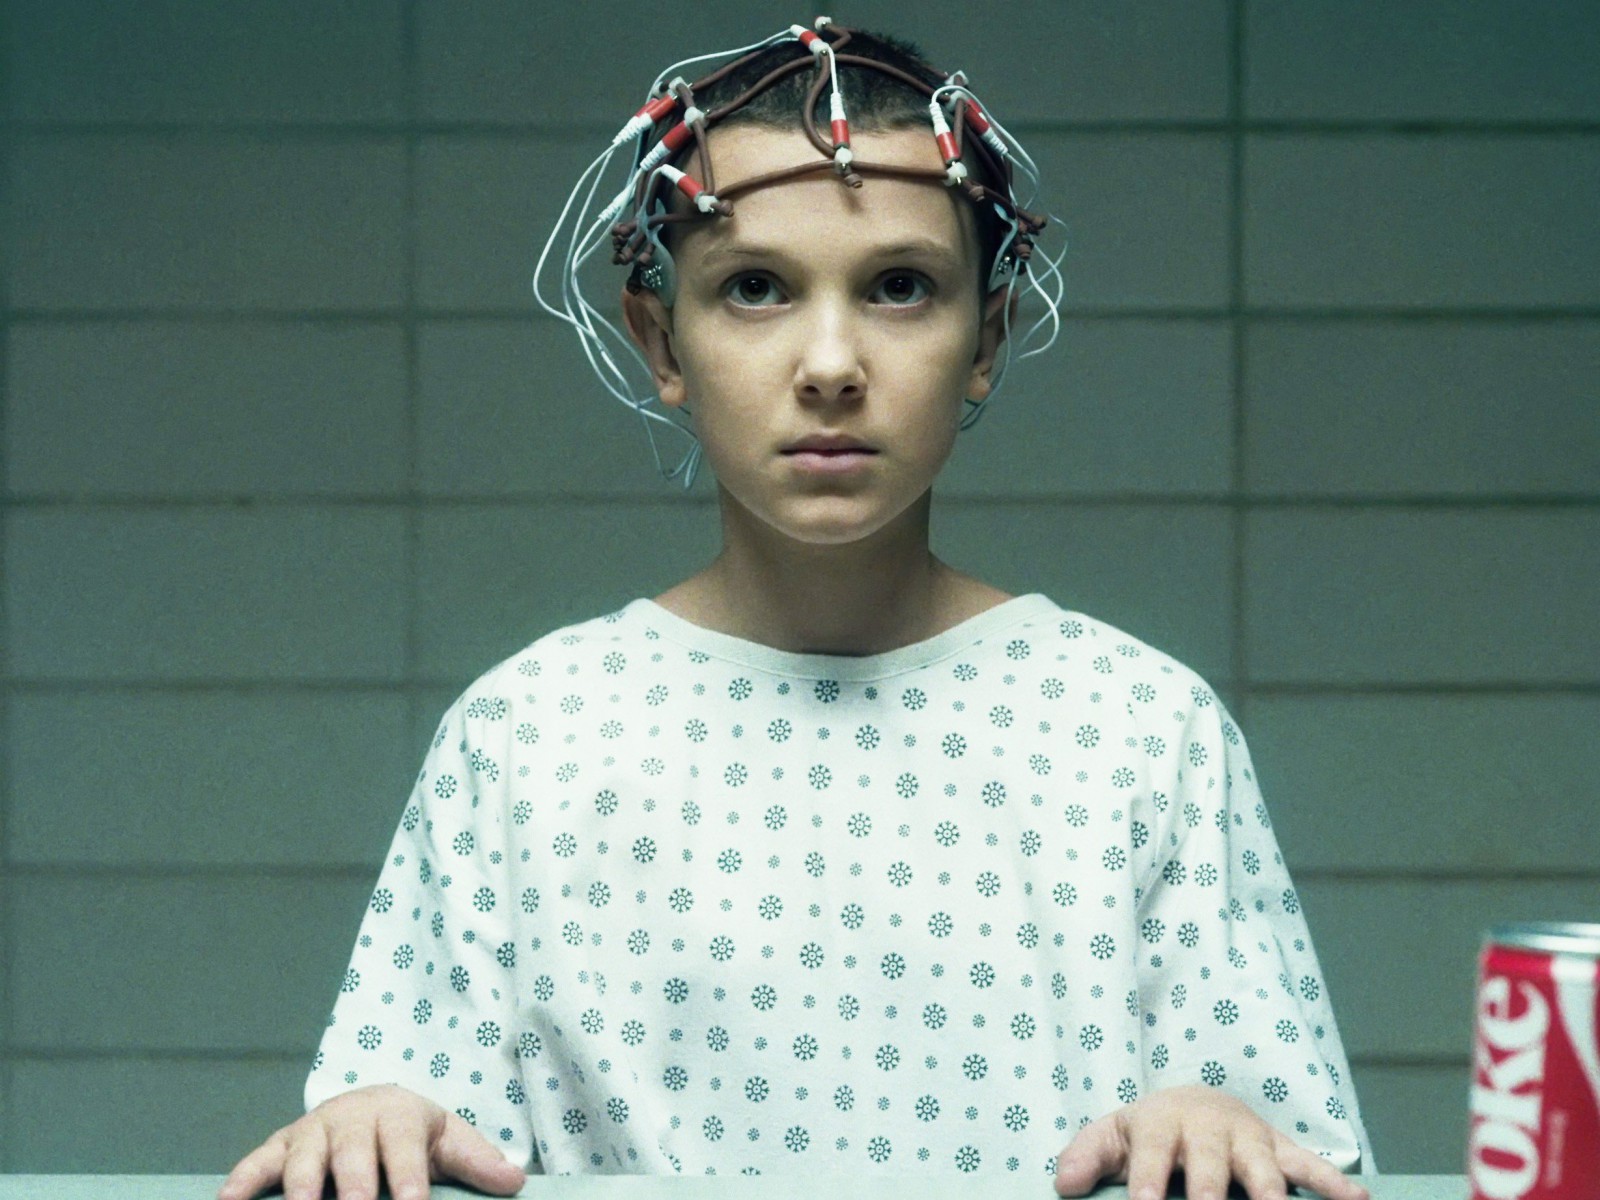 Stranger Things created a starlet in Millie Bobby Brown in 2016